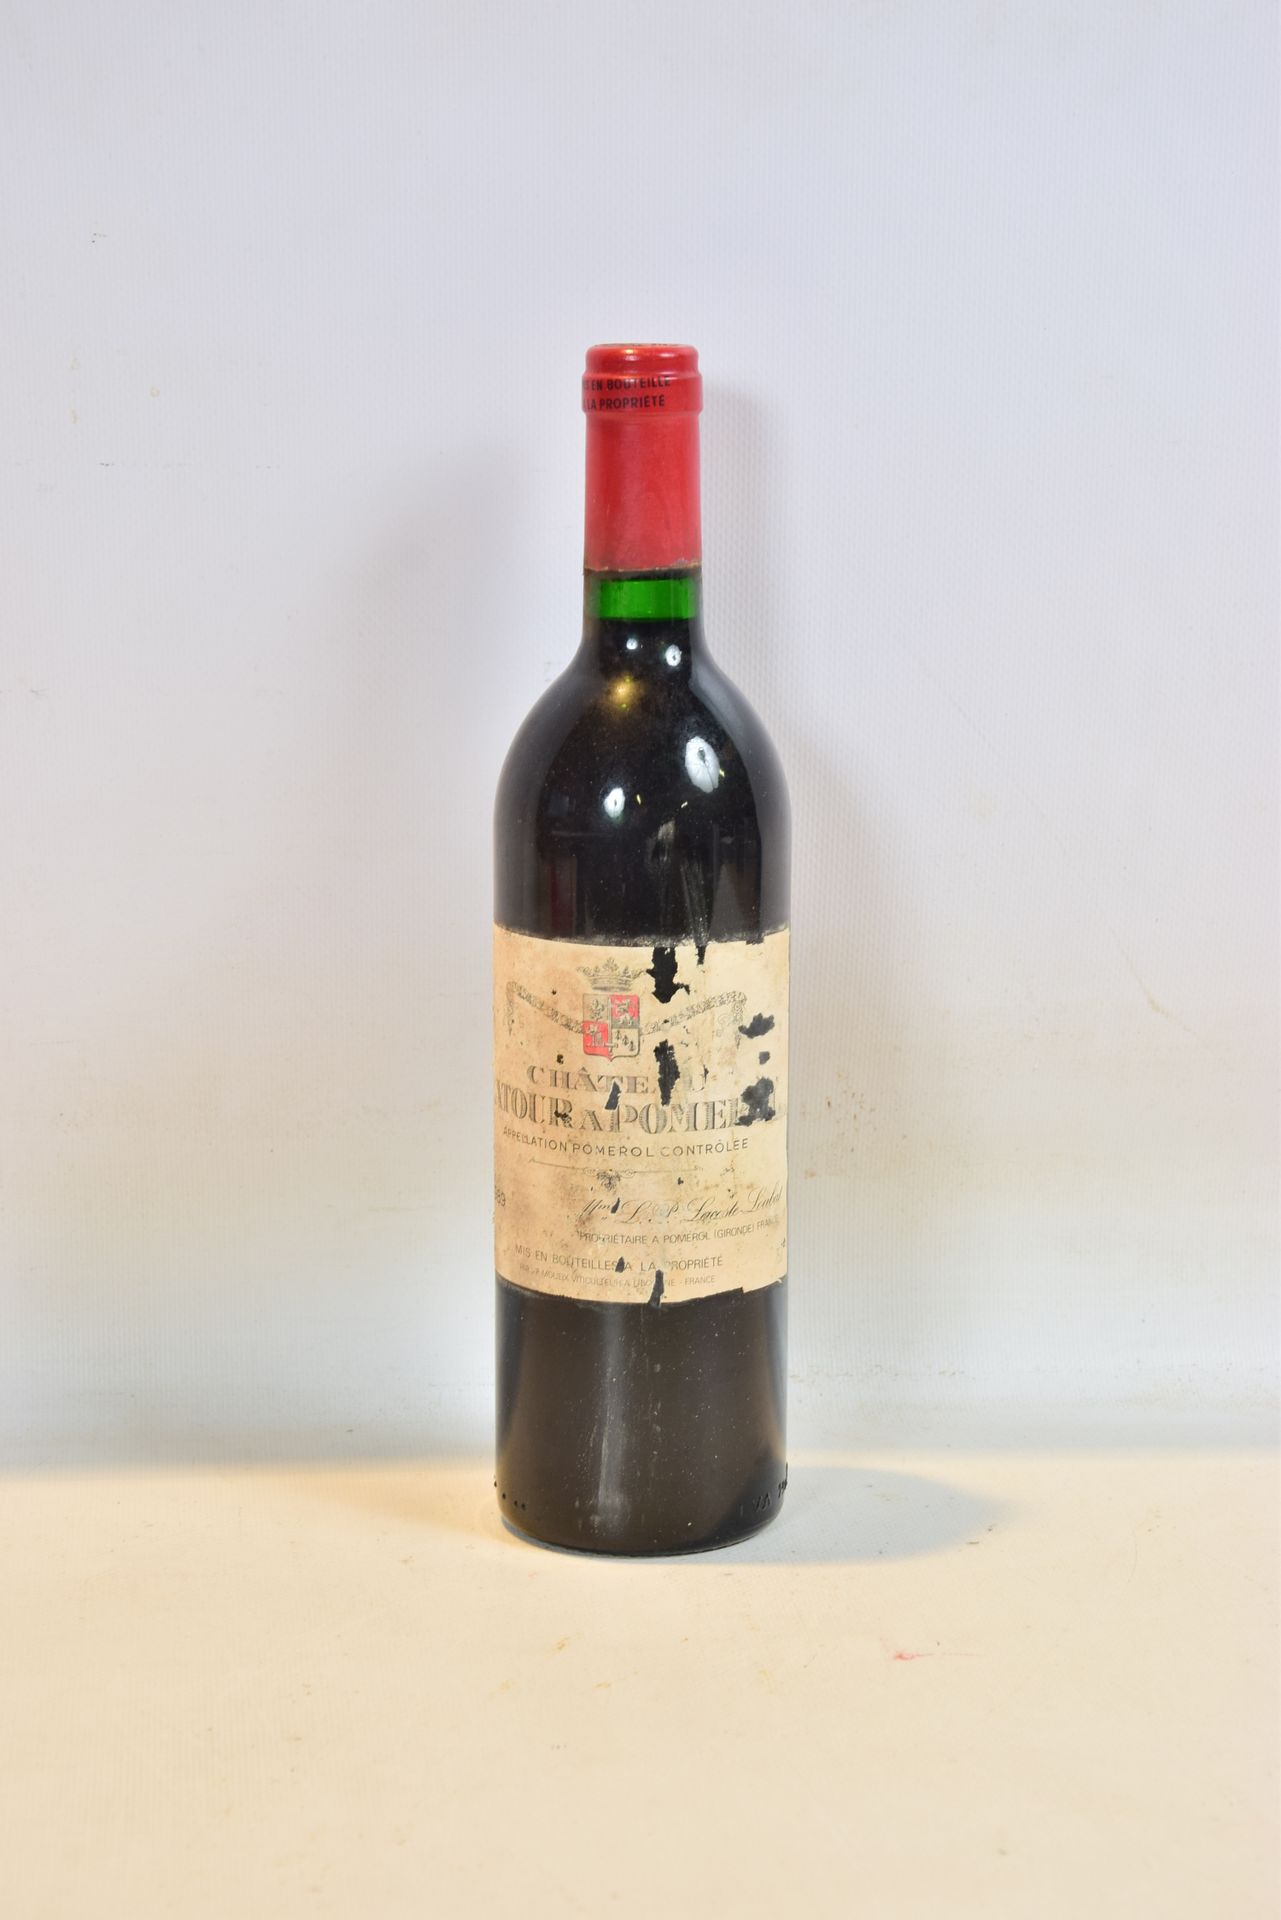 Null 1 Blle CH. LATOUR A POMEROL Pomerol 1989

	Faded, stained and worn out. N: &hellip;